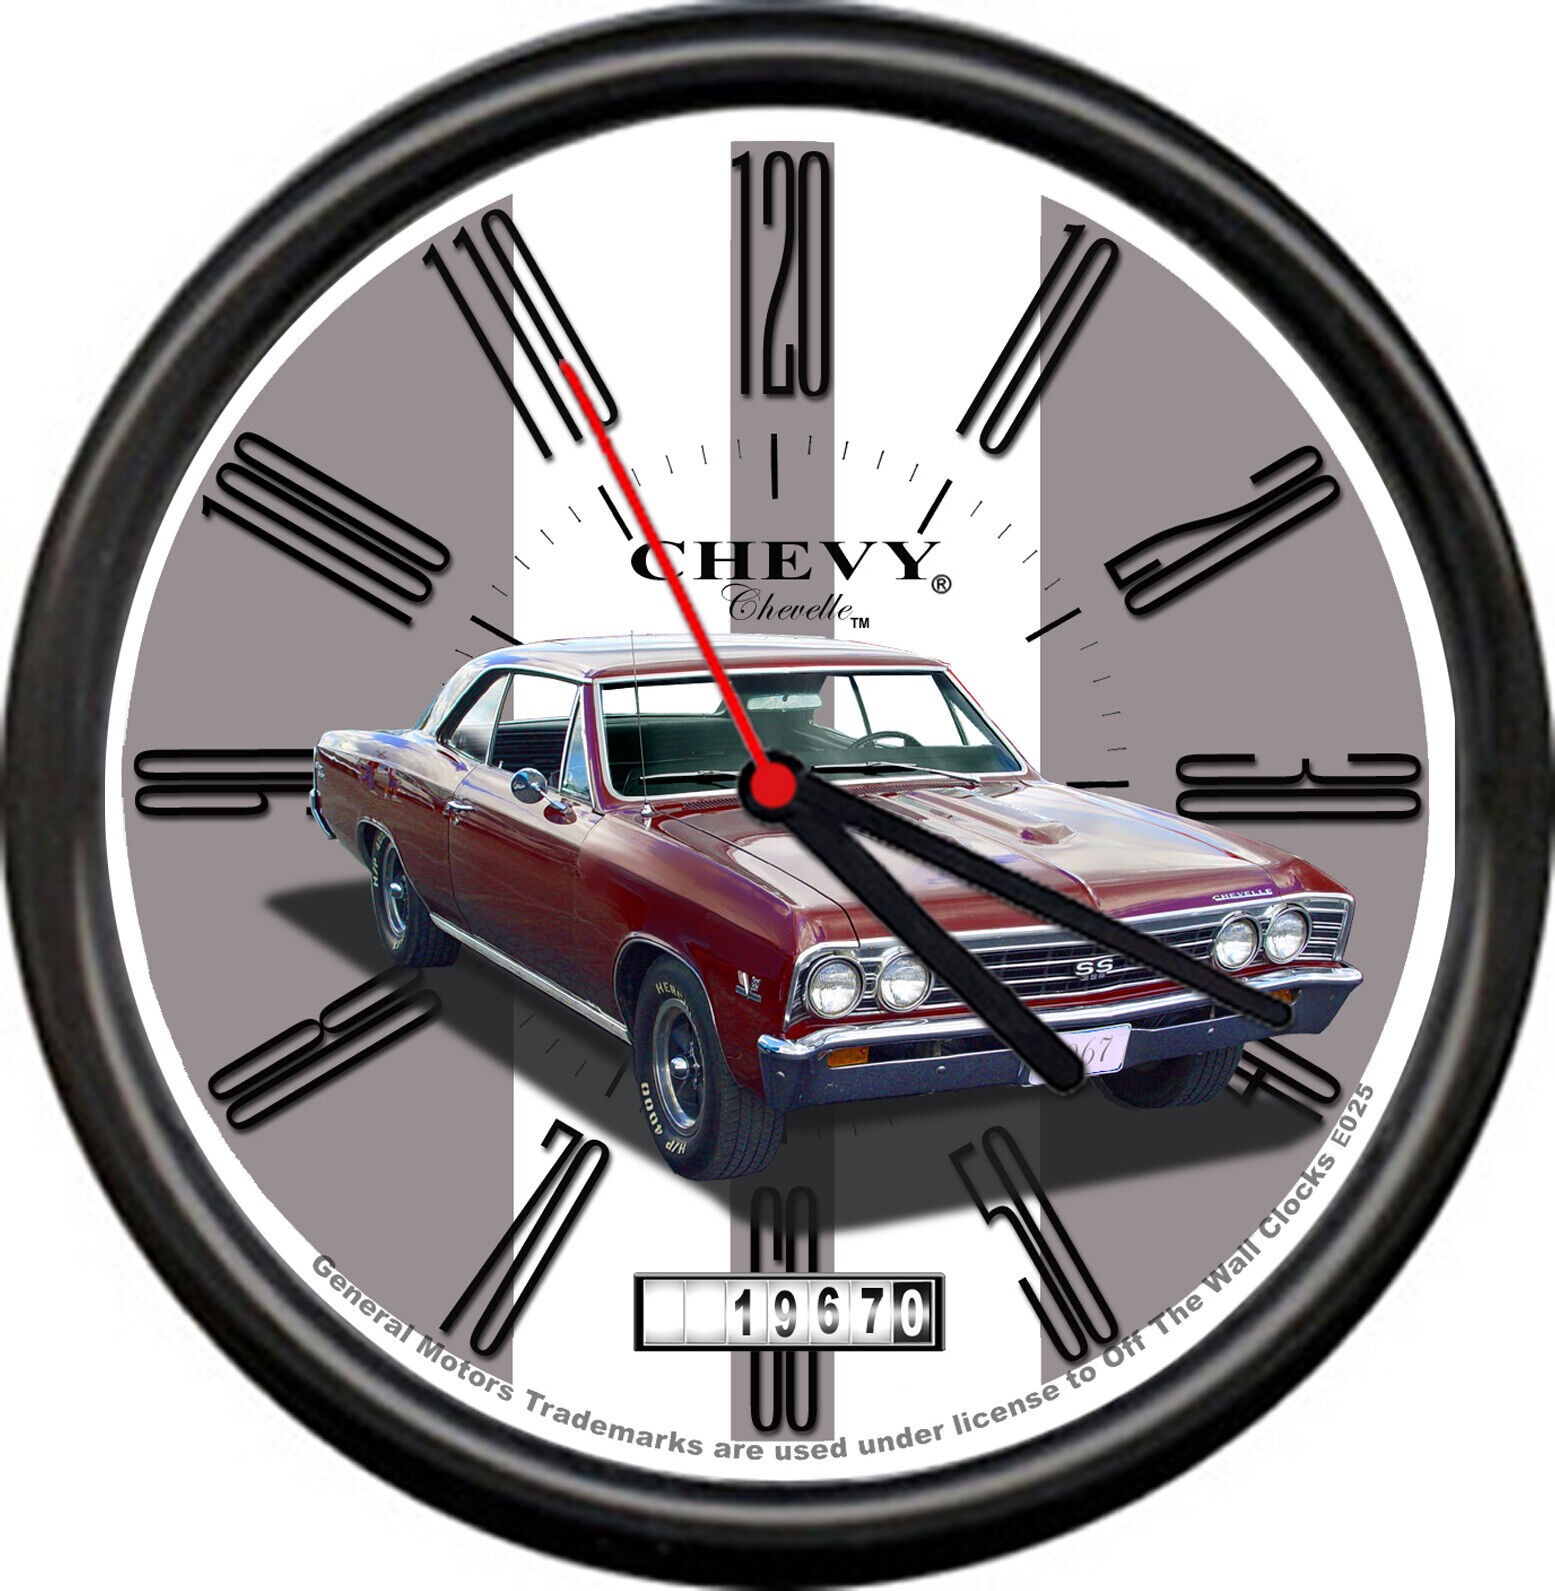 Licensed 1967 Classic Chevy Chevelle Chevrolet General Motors Sign Wall Clock